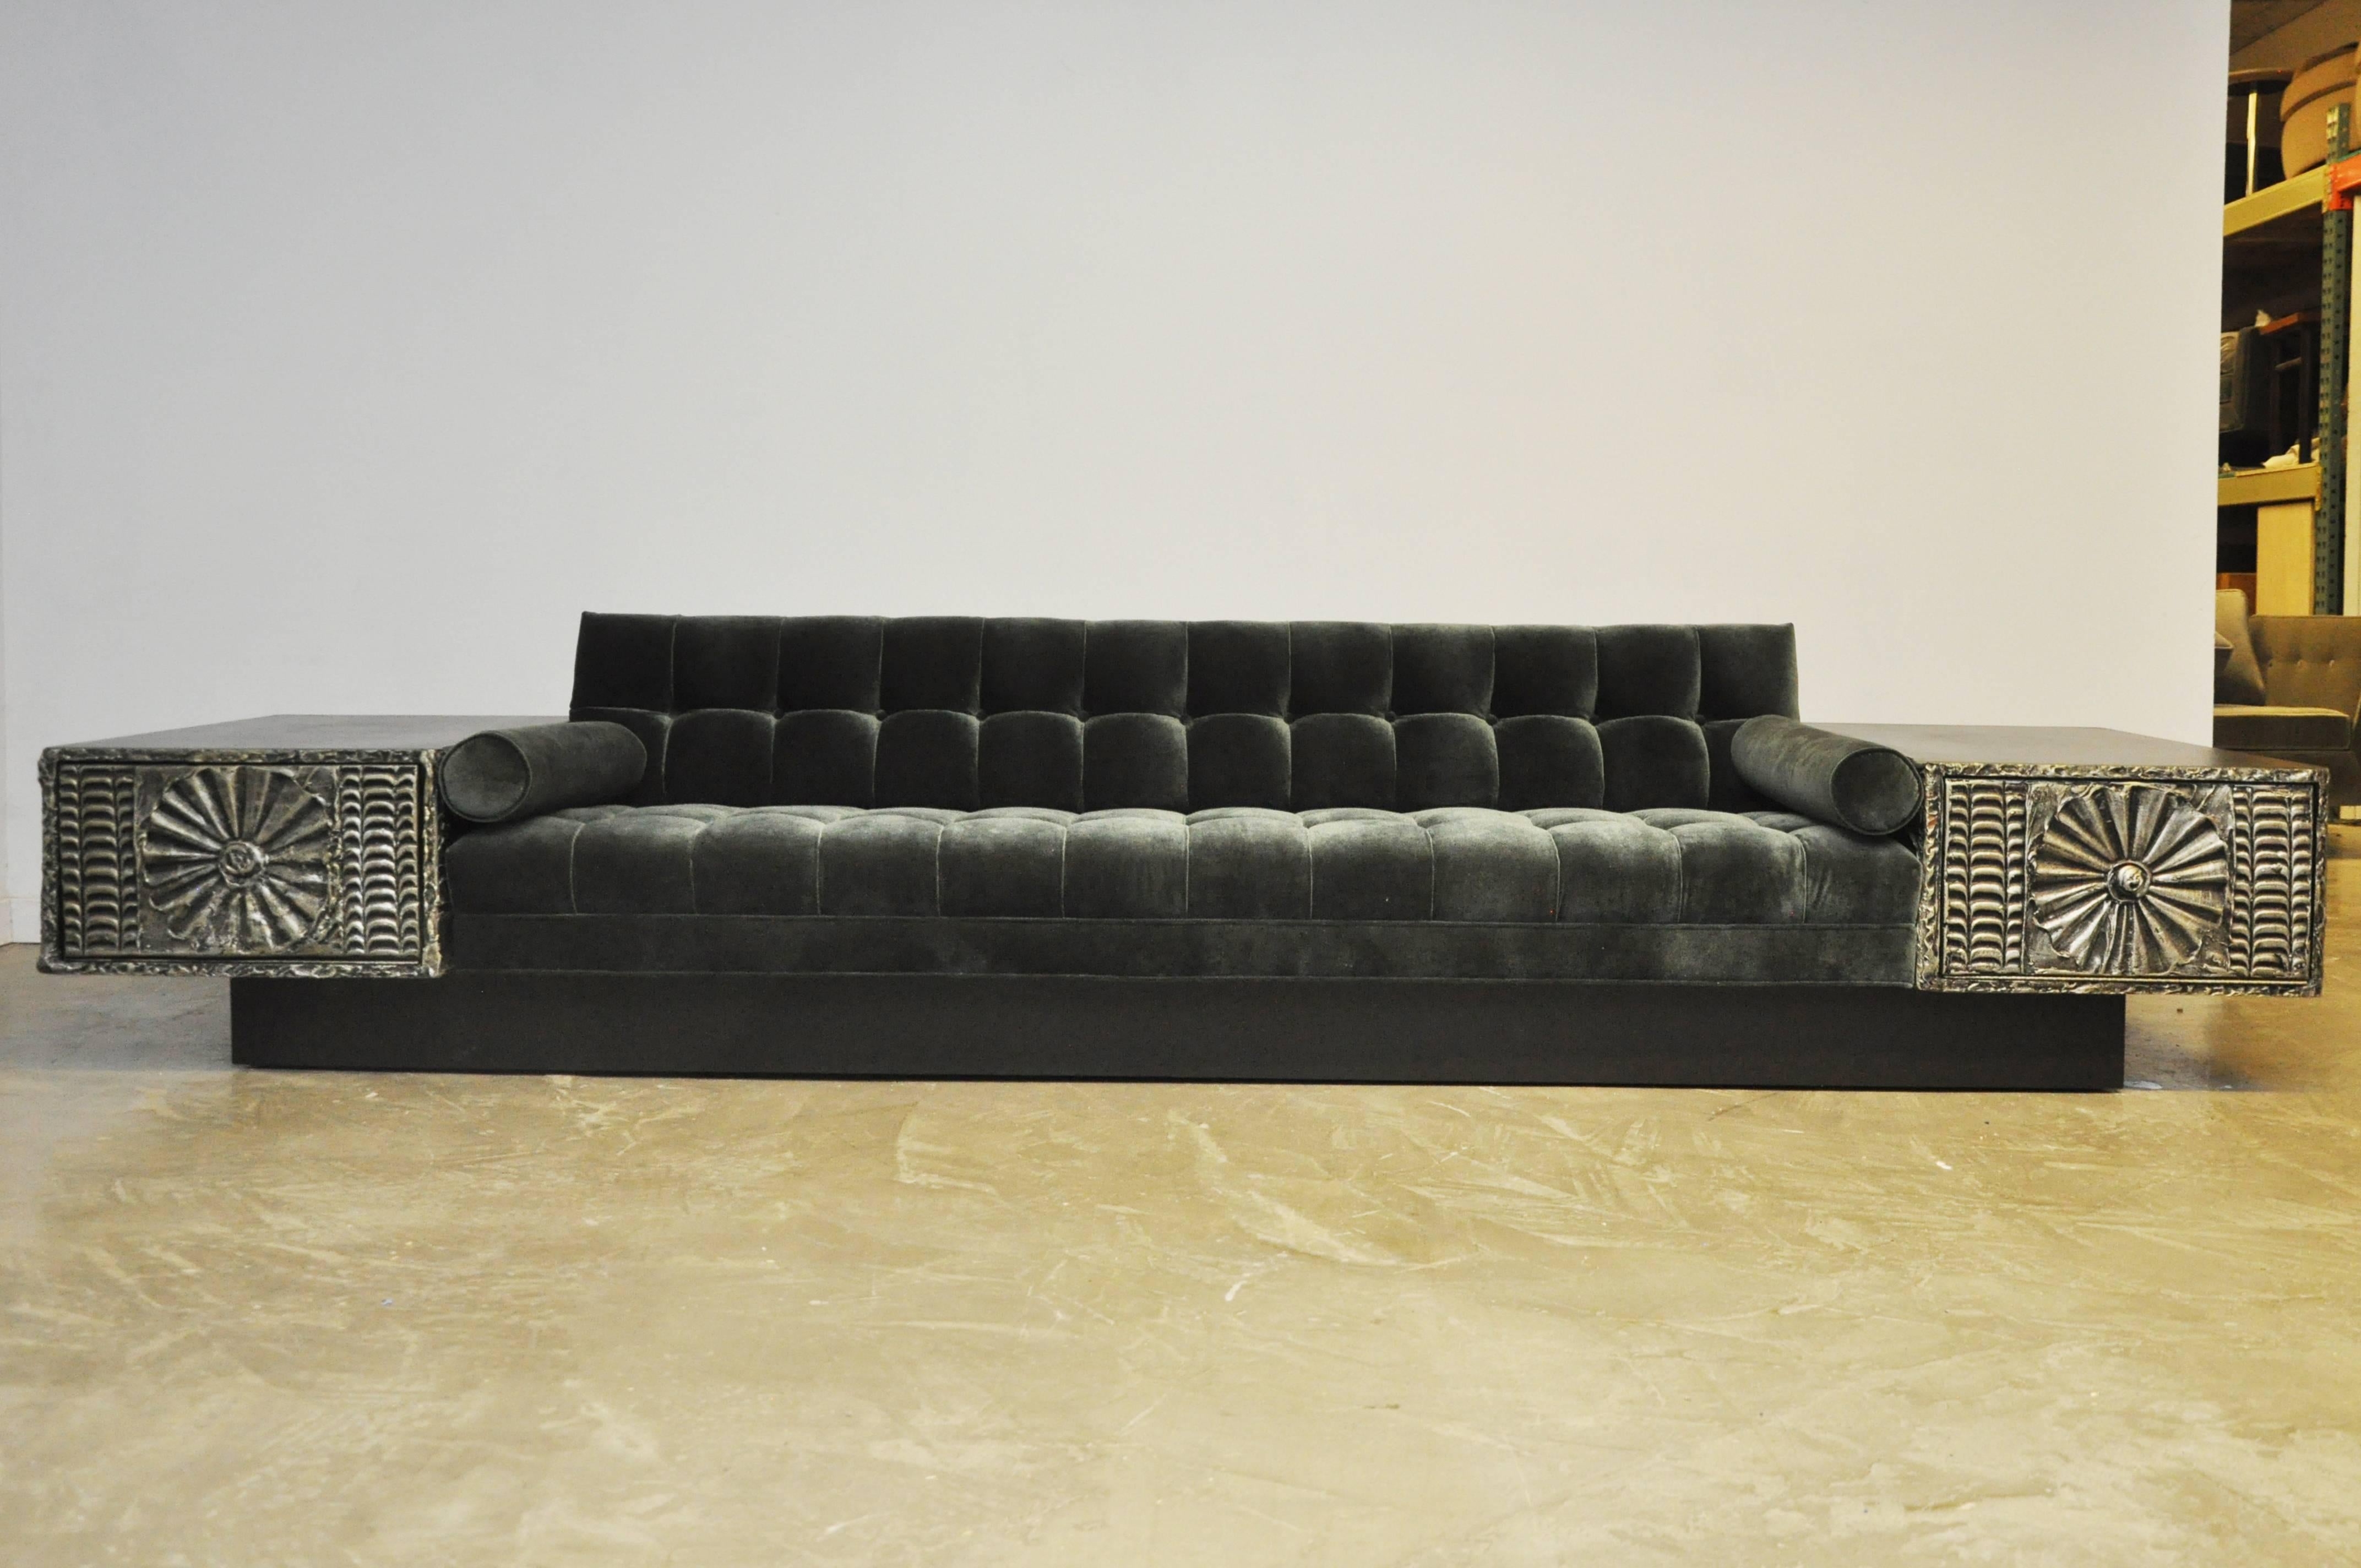 Brutalist platform sofa by Adrian Pearsall. Fully restored. Newly upholstered in biscuit tufted velvet. Built in side tables with drop down fronts for storage.